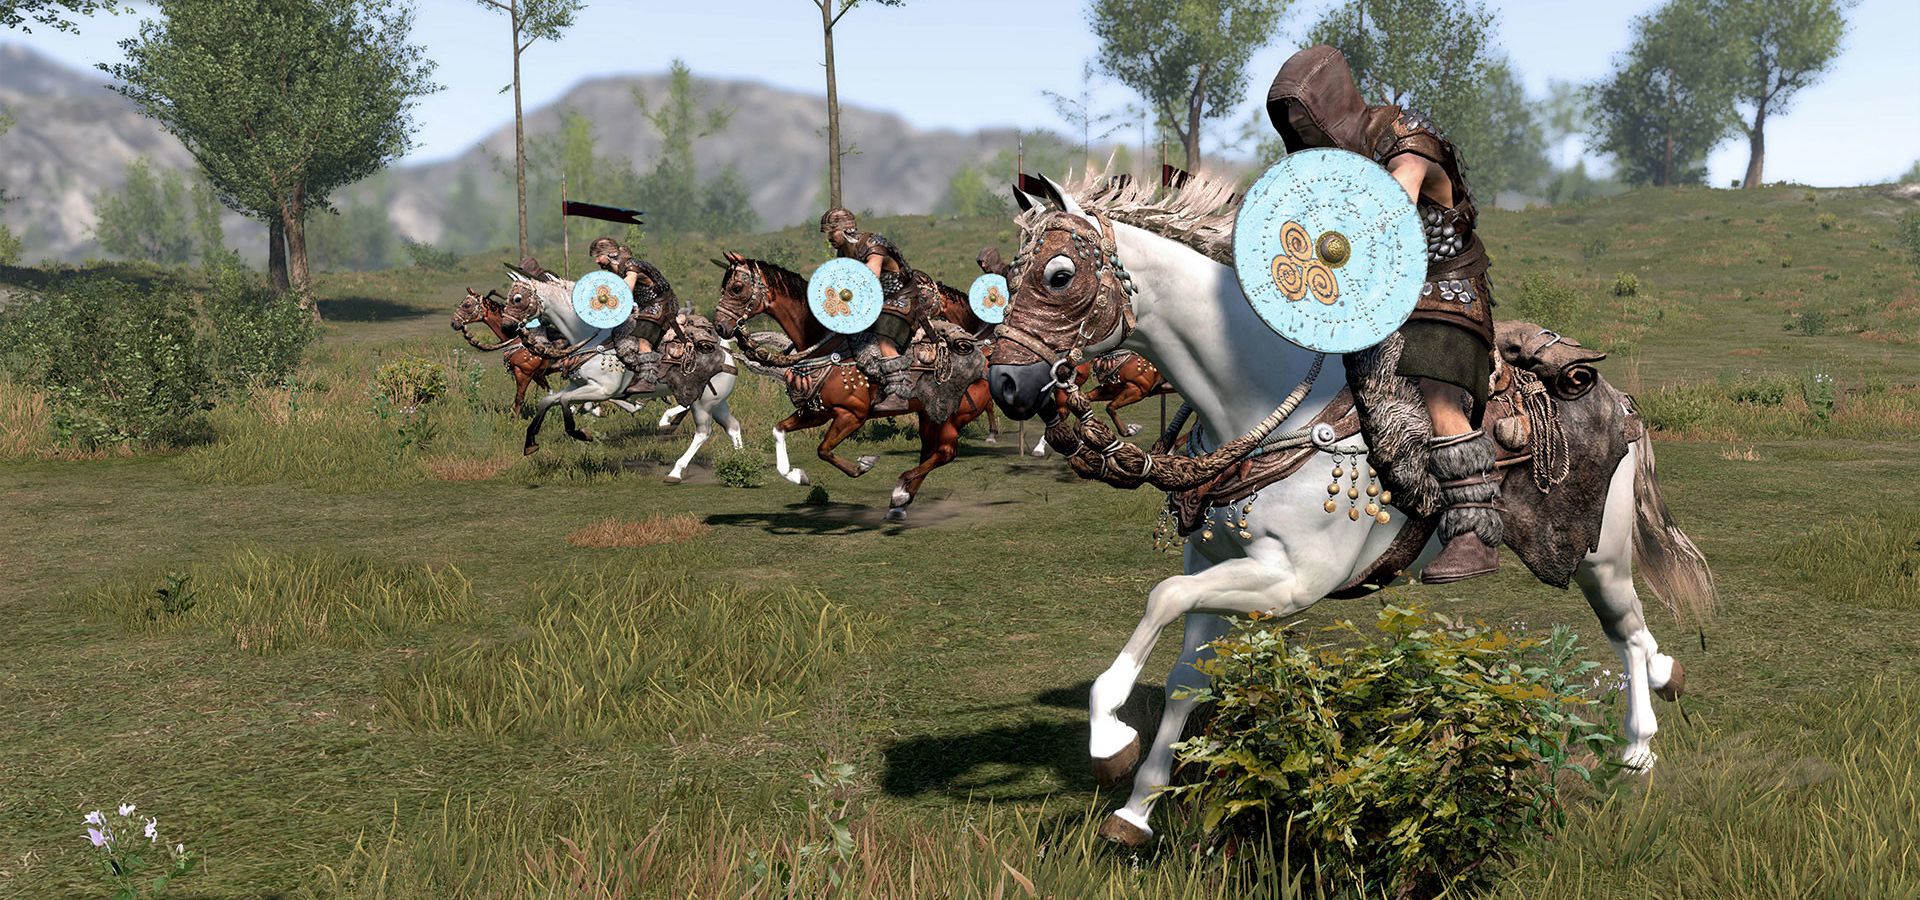 In this article, we are going to be covering Bannerlord Not working: How to fix Mount And Blade 2 Bannerlord Not Launching error so that you can play it with no issues.